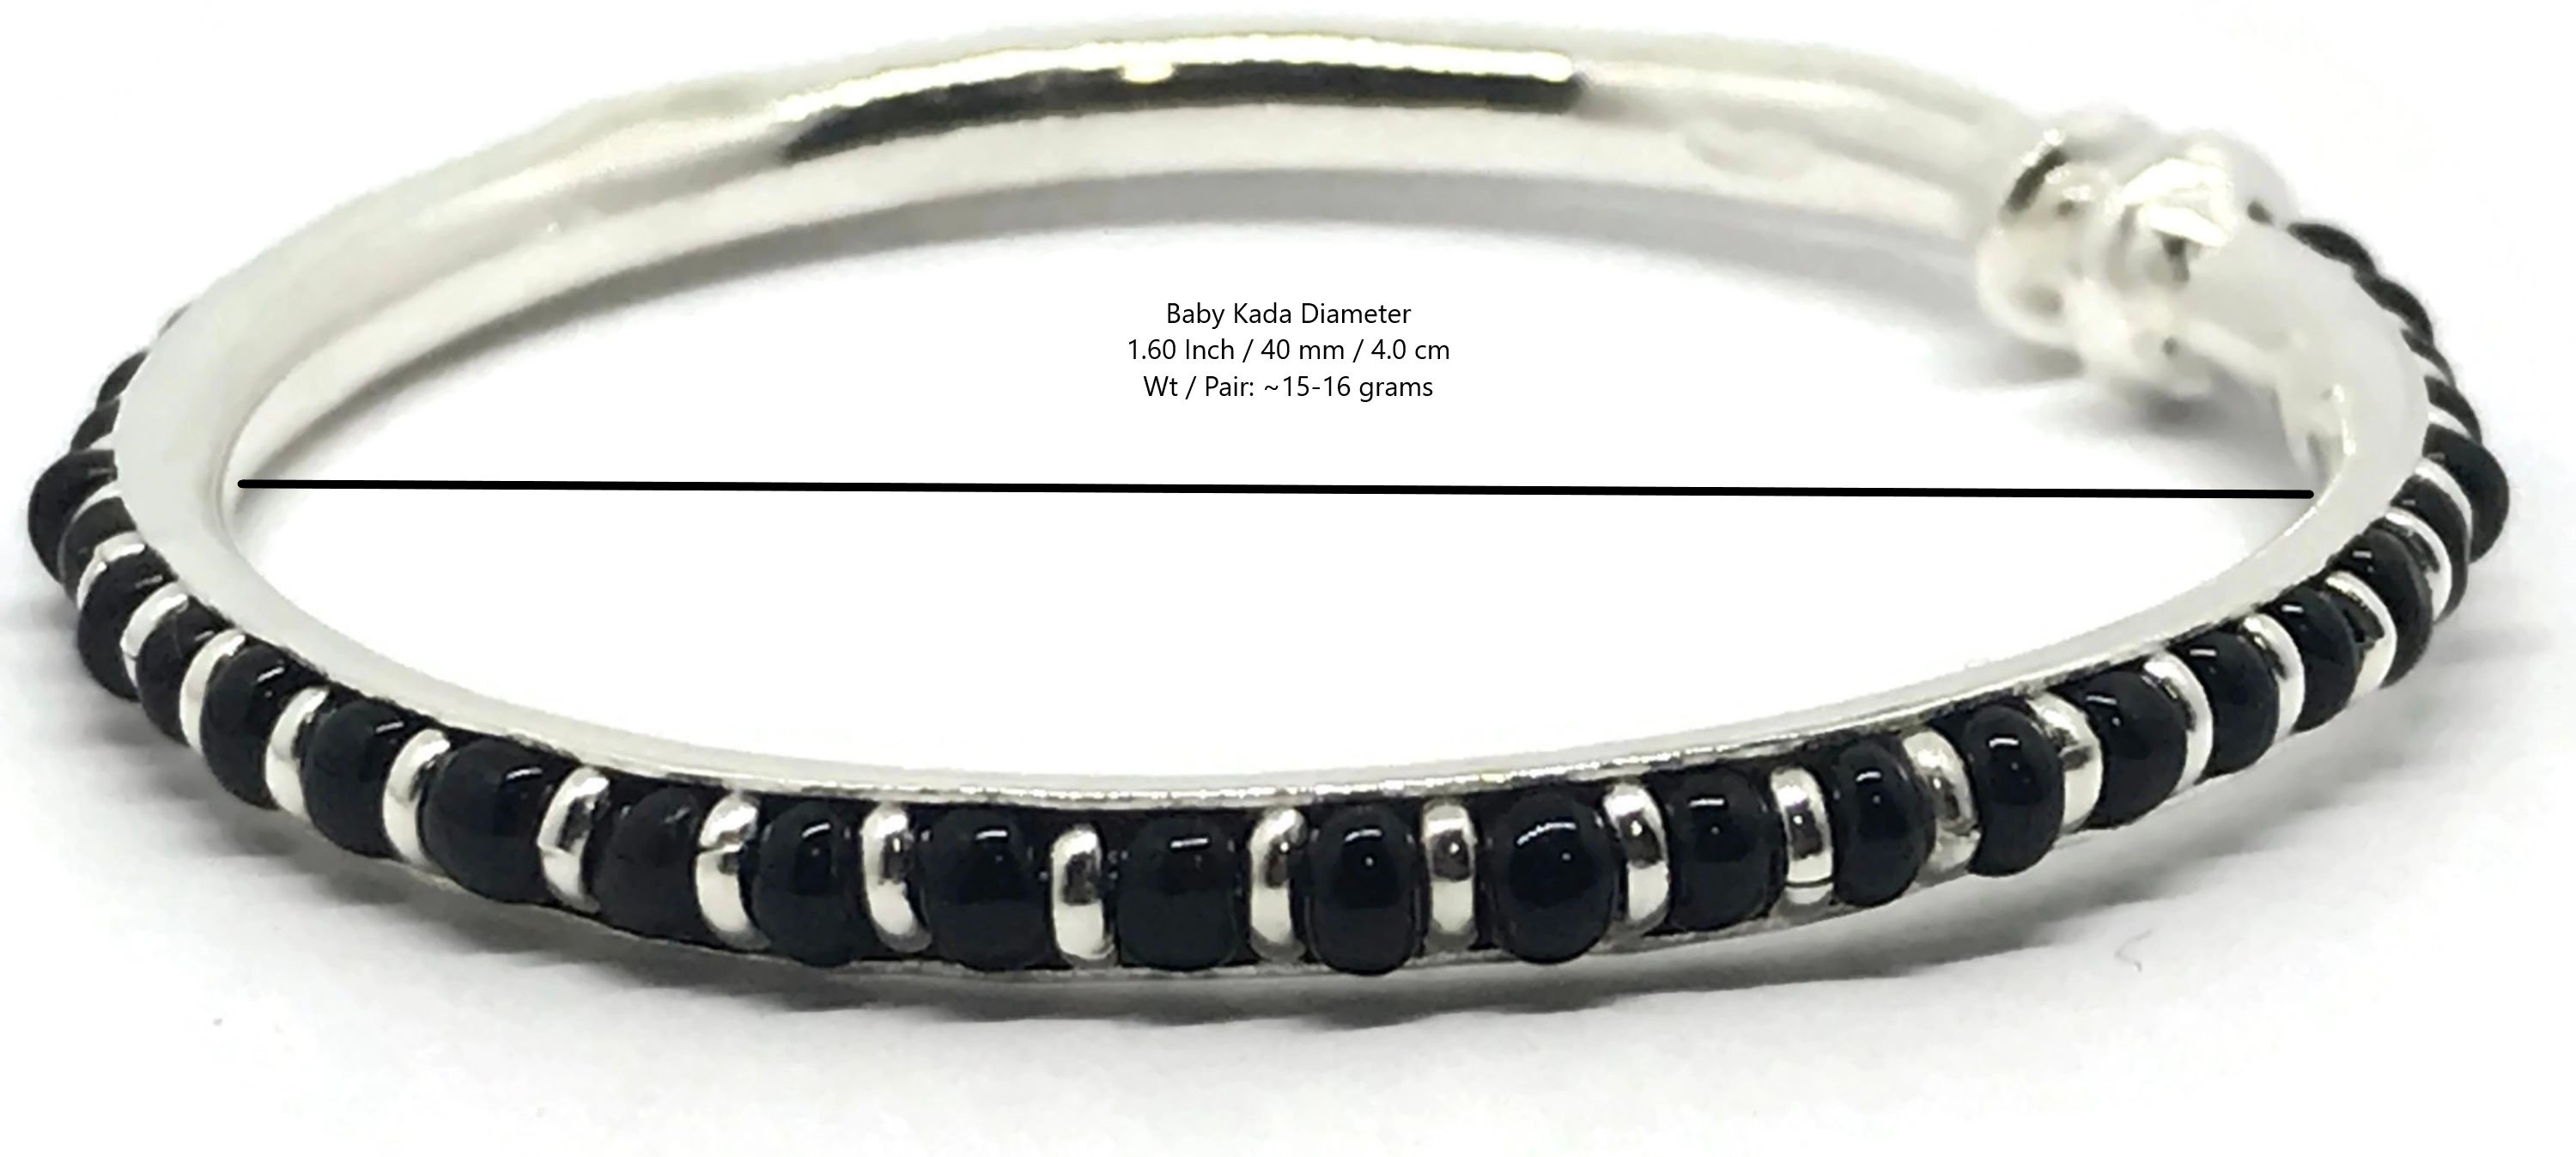 925 Sterling Silver New Born / Toddler Kids Black Beads Kada - Style#14 Diameter Size: 1.6 inch(6-18 month) - image 1 of 1